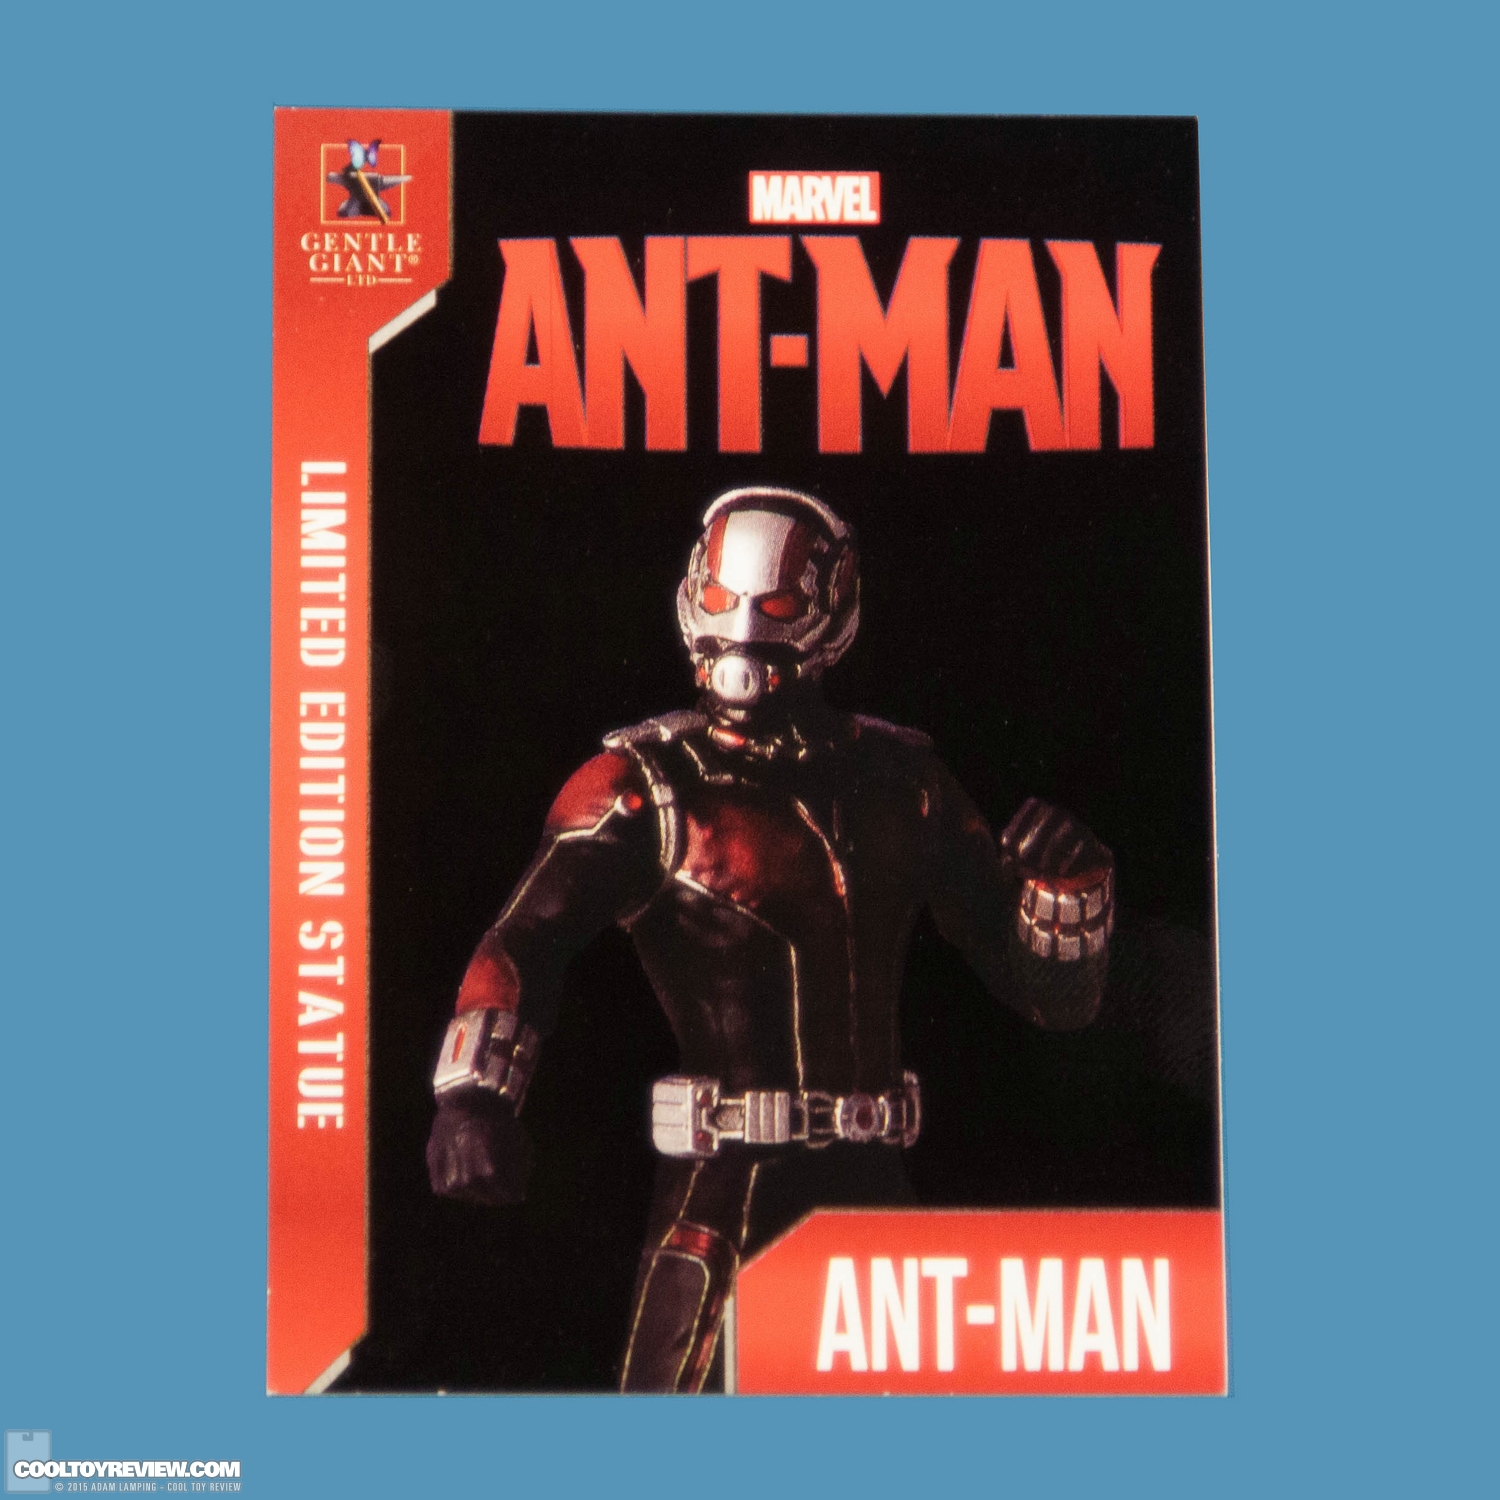 gentle-giant-ant-man-statue-2015-convention-exclusive-016.jpg